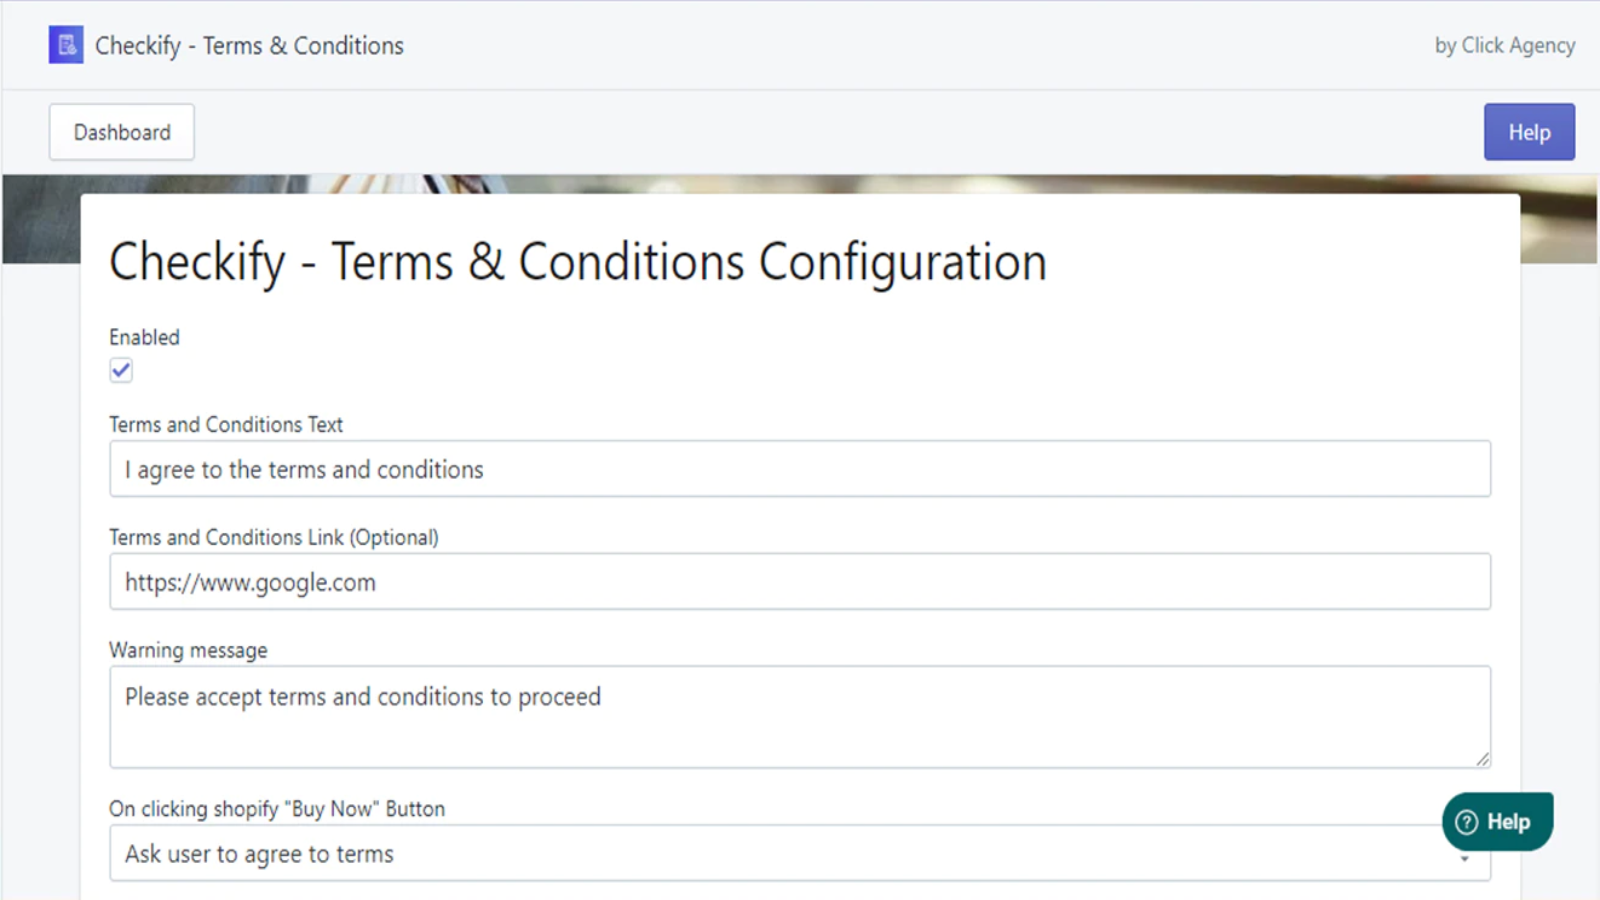 Edit the checkbox text & link to your Terms and conditions page